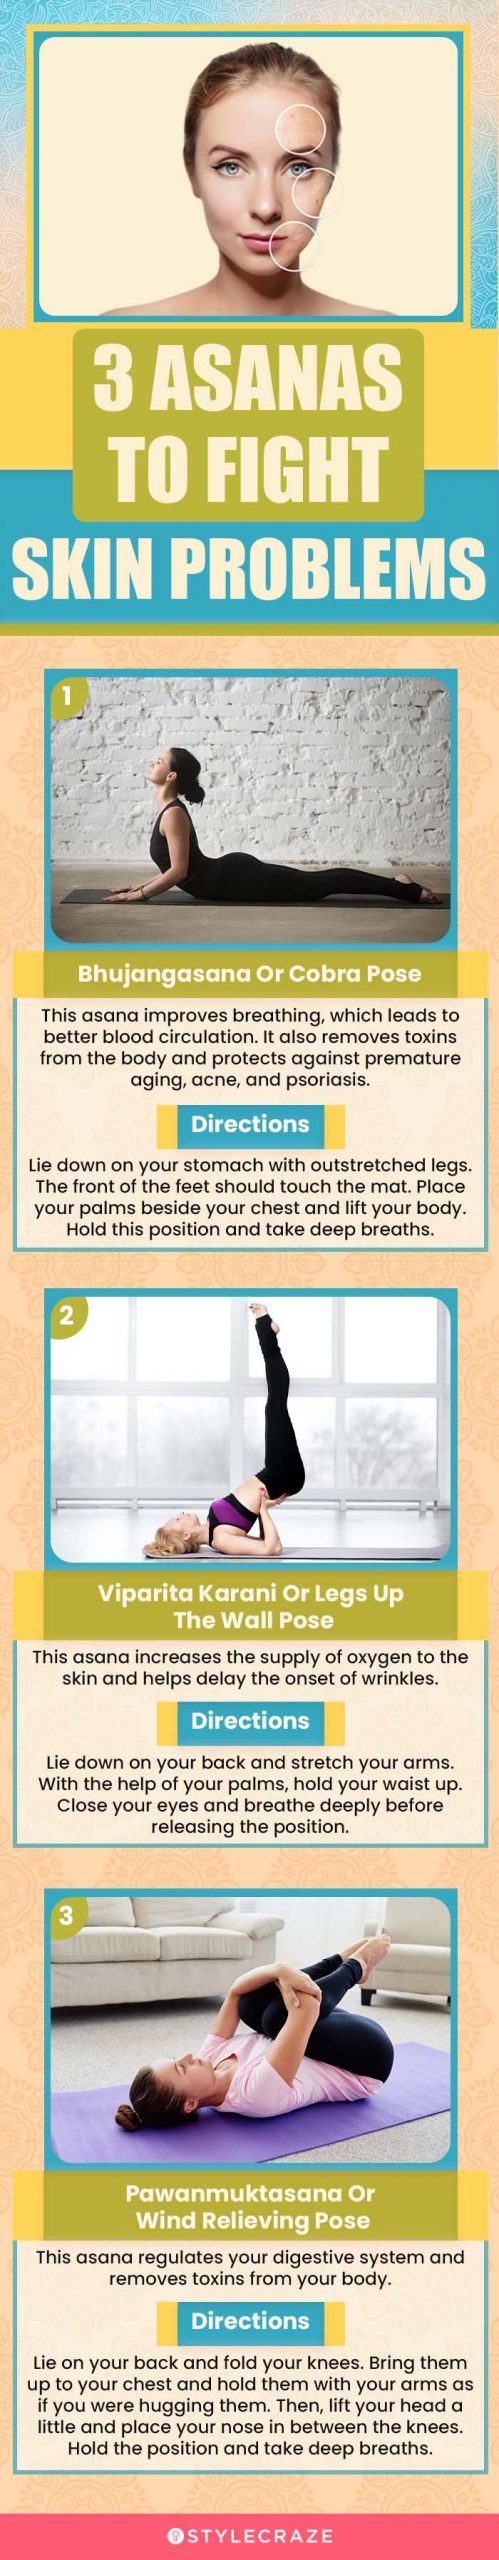 3 asanas to fight skin problems (infographic)